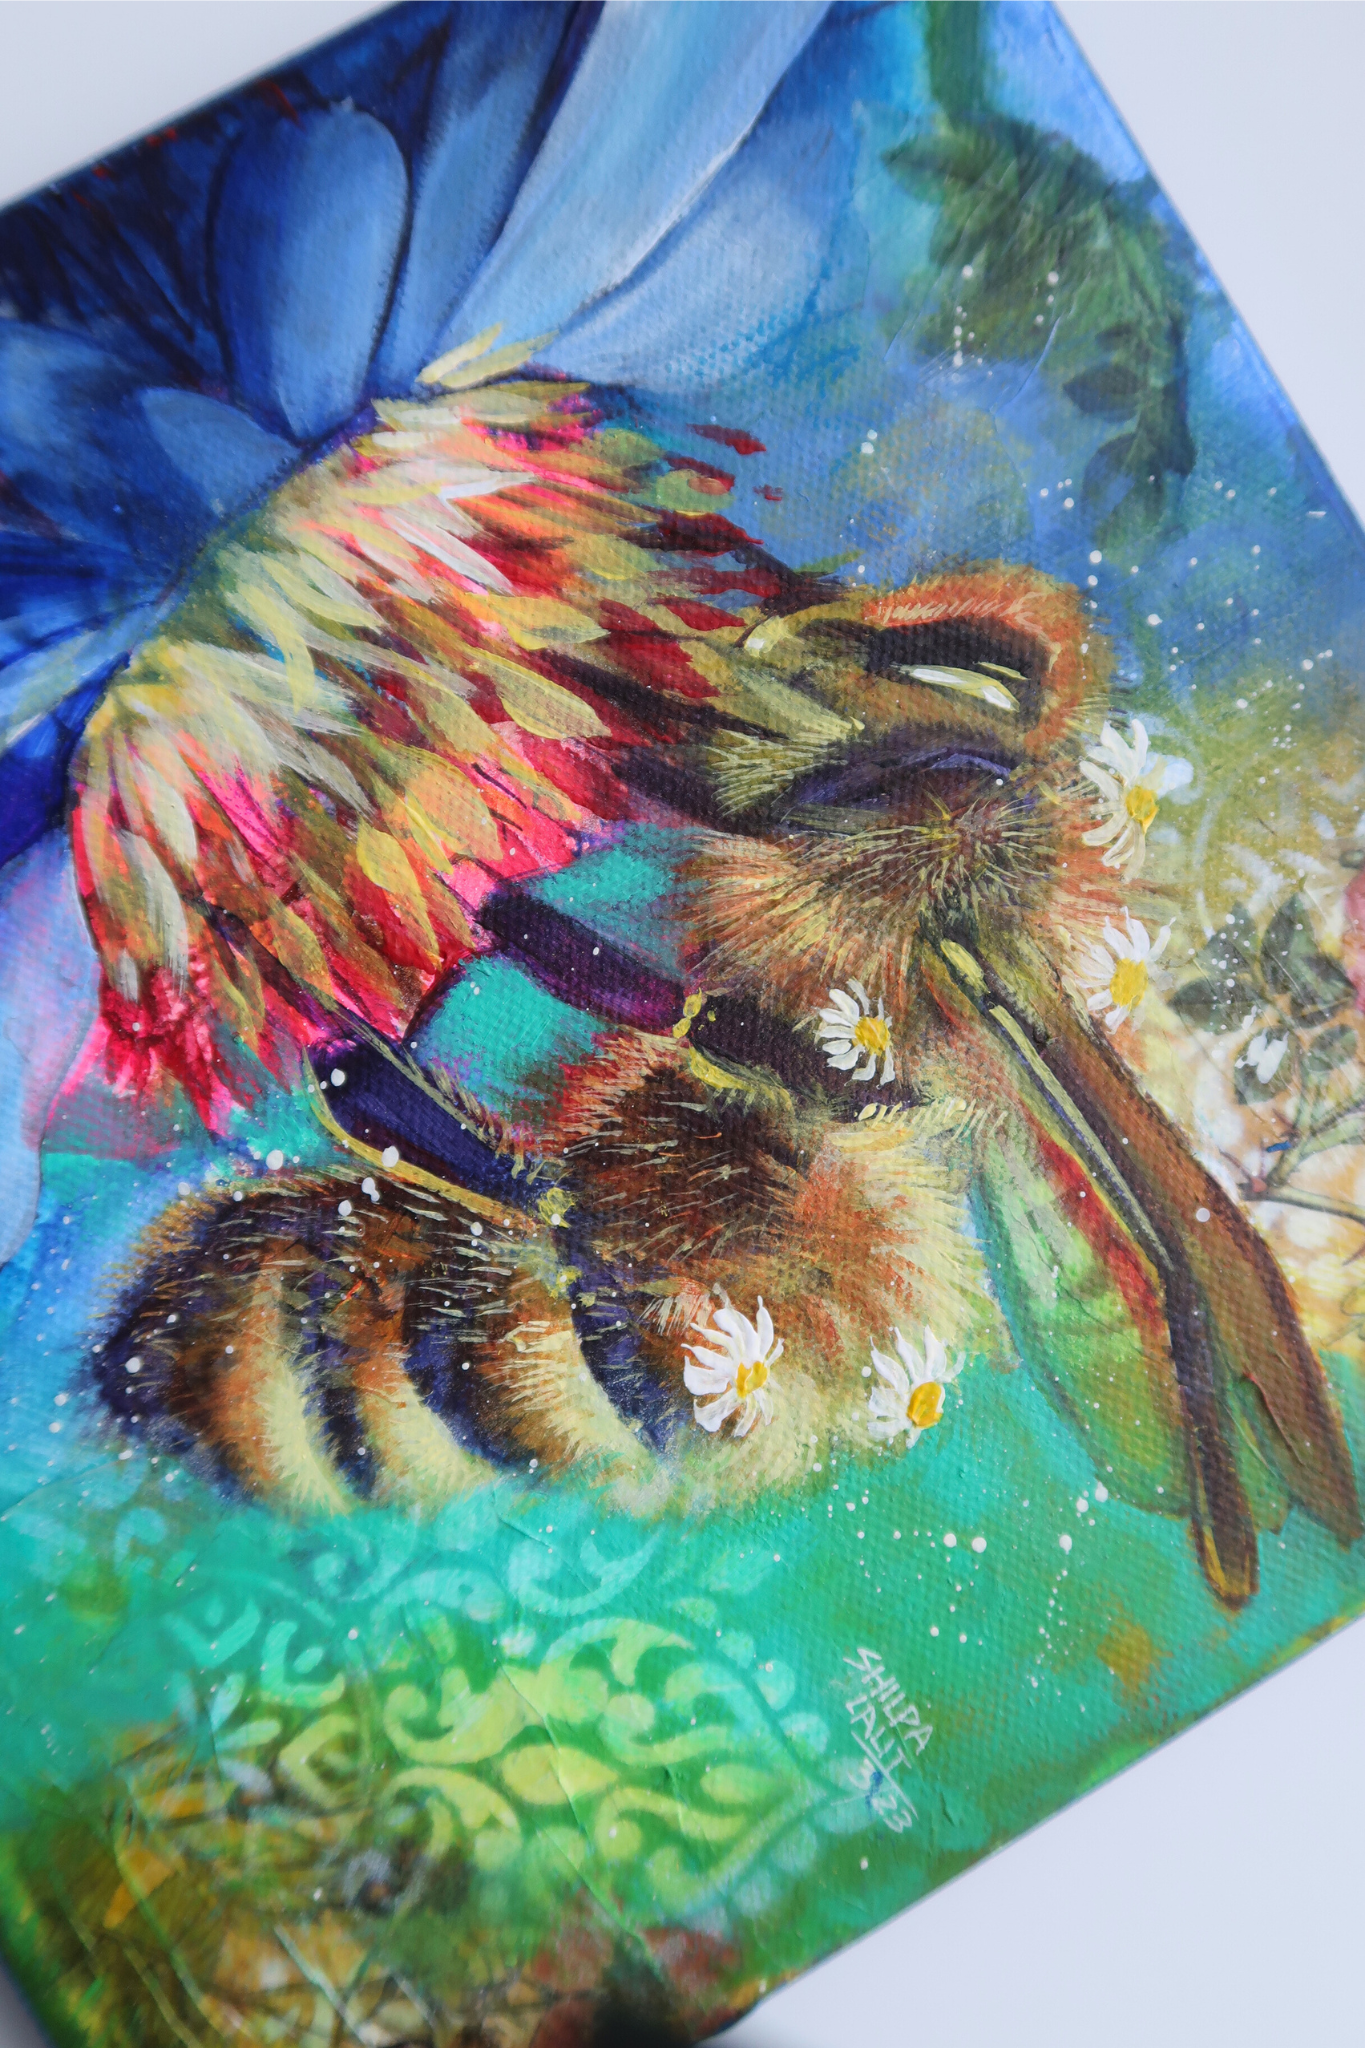 Buzz with the Bees - Lets paint the Queen Bee using Acrylic paints and mixed media on canvas